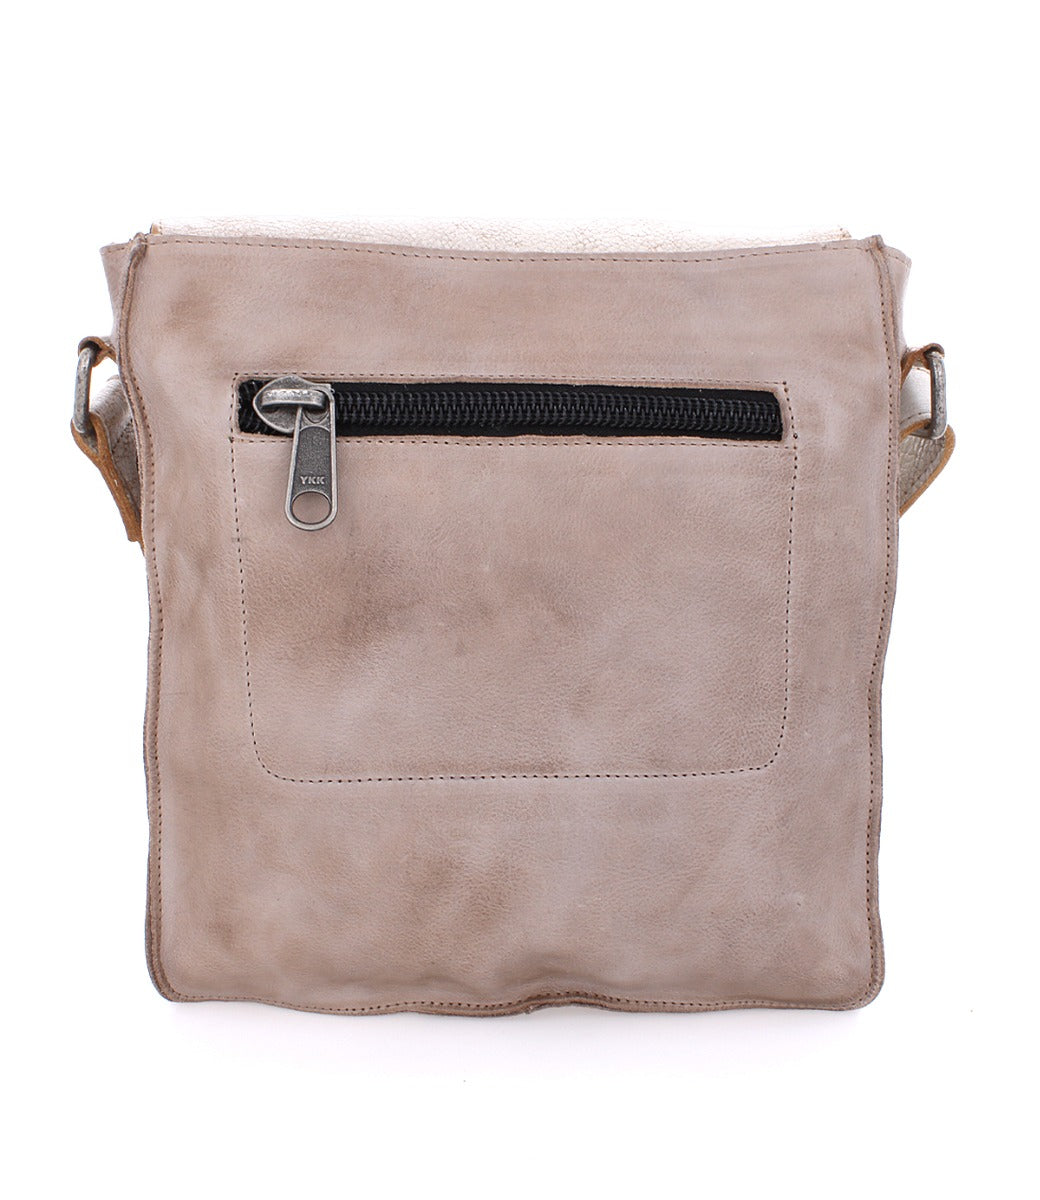 A Venice Beach leather messenger bag with a zippered compartment, made by Bed Stu.